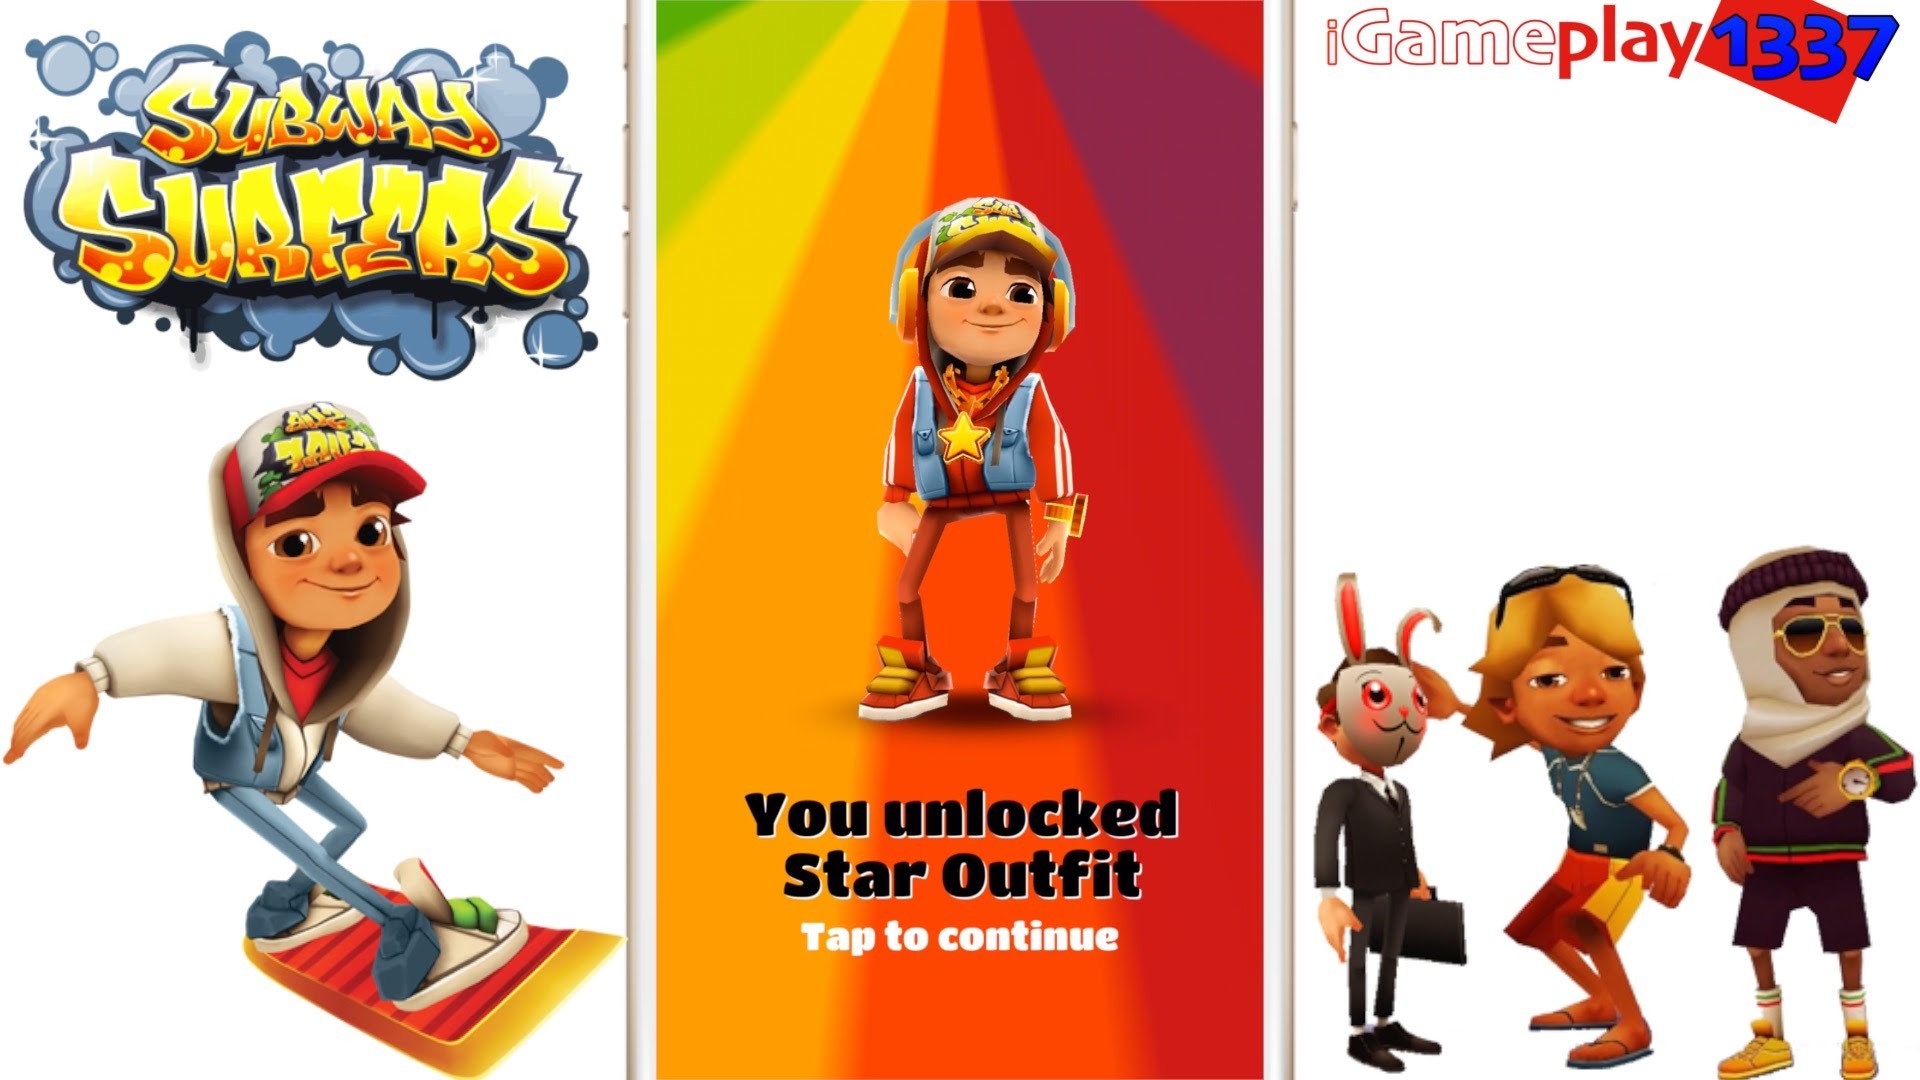 1920x1080 Subway Surfers - JAKE STAR OUTFIT Character - Review / Gameplay - YouTube